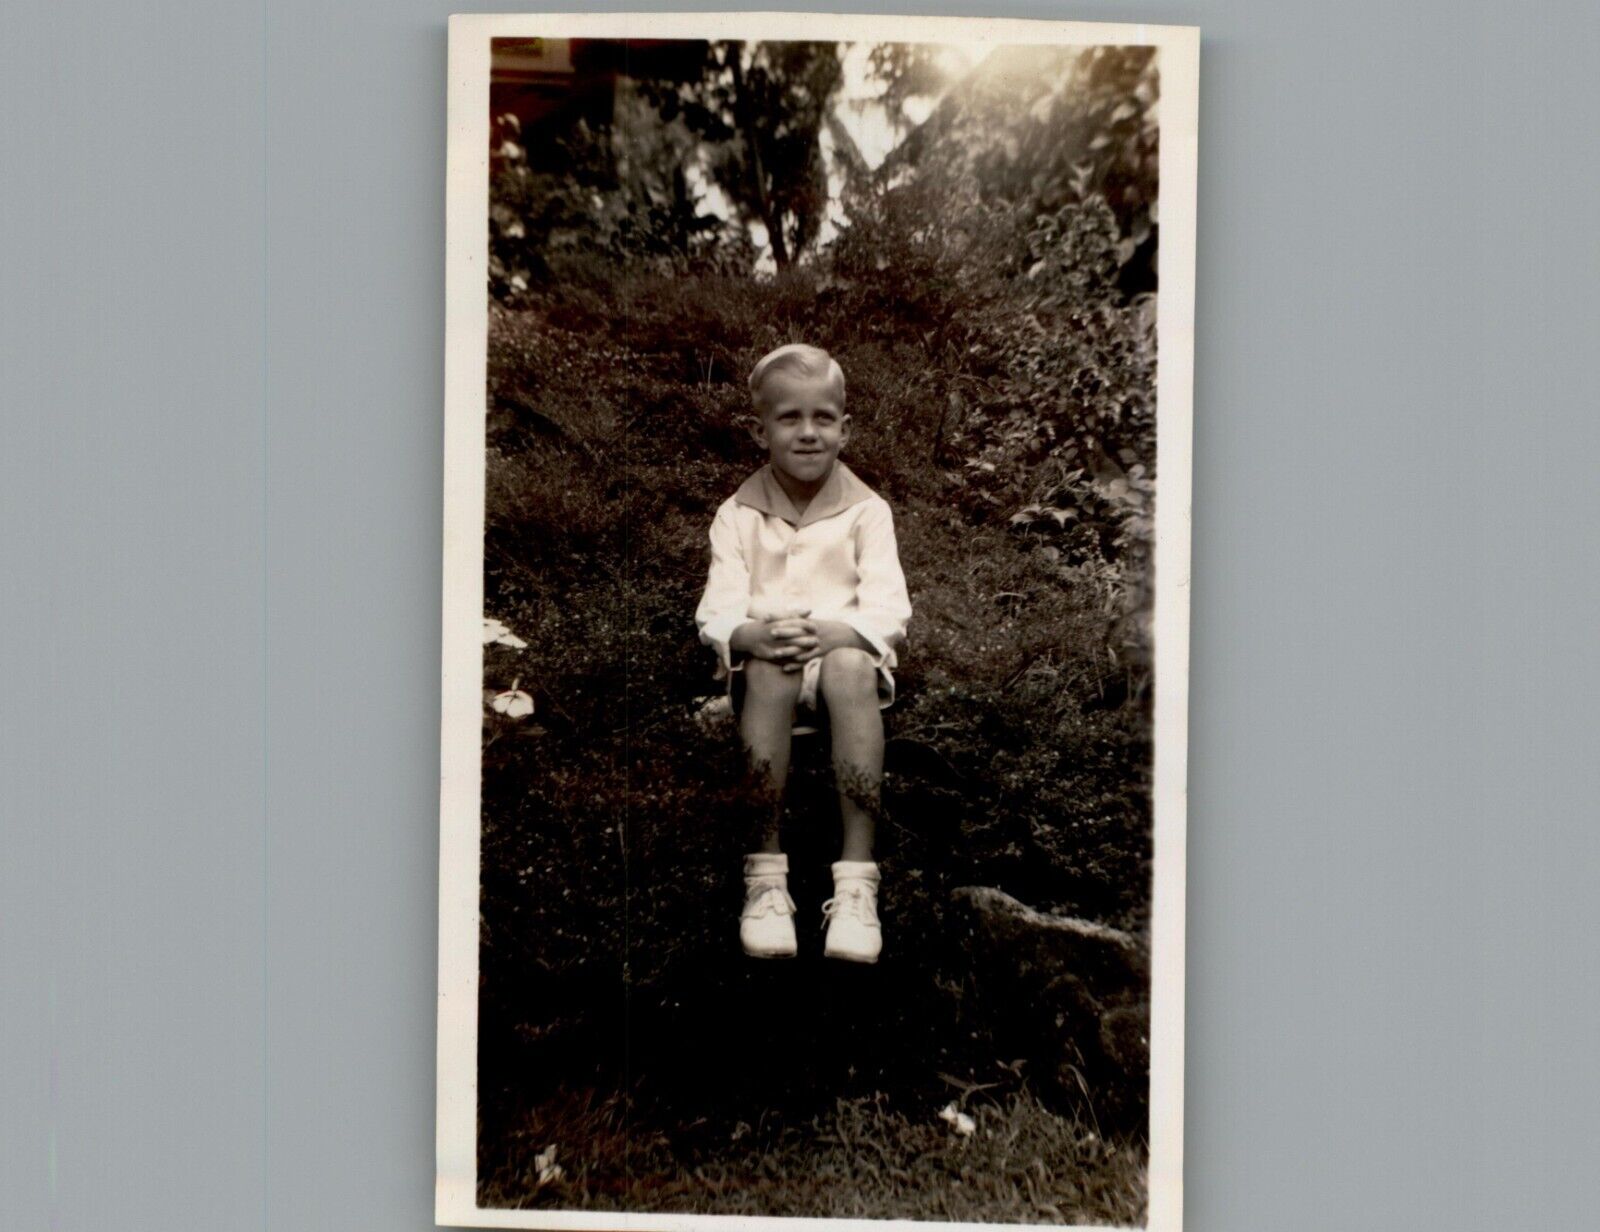 Antique 1940's Young Boy Sitting for Picture Black & White Photography Photo